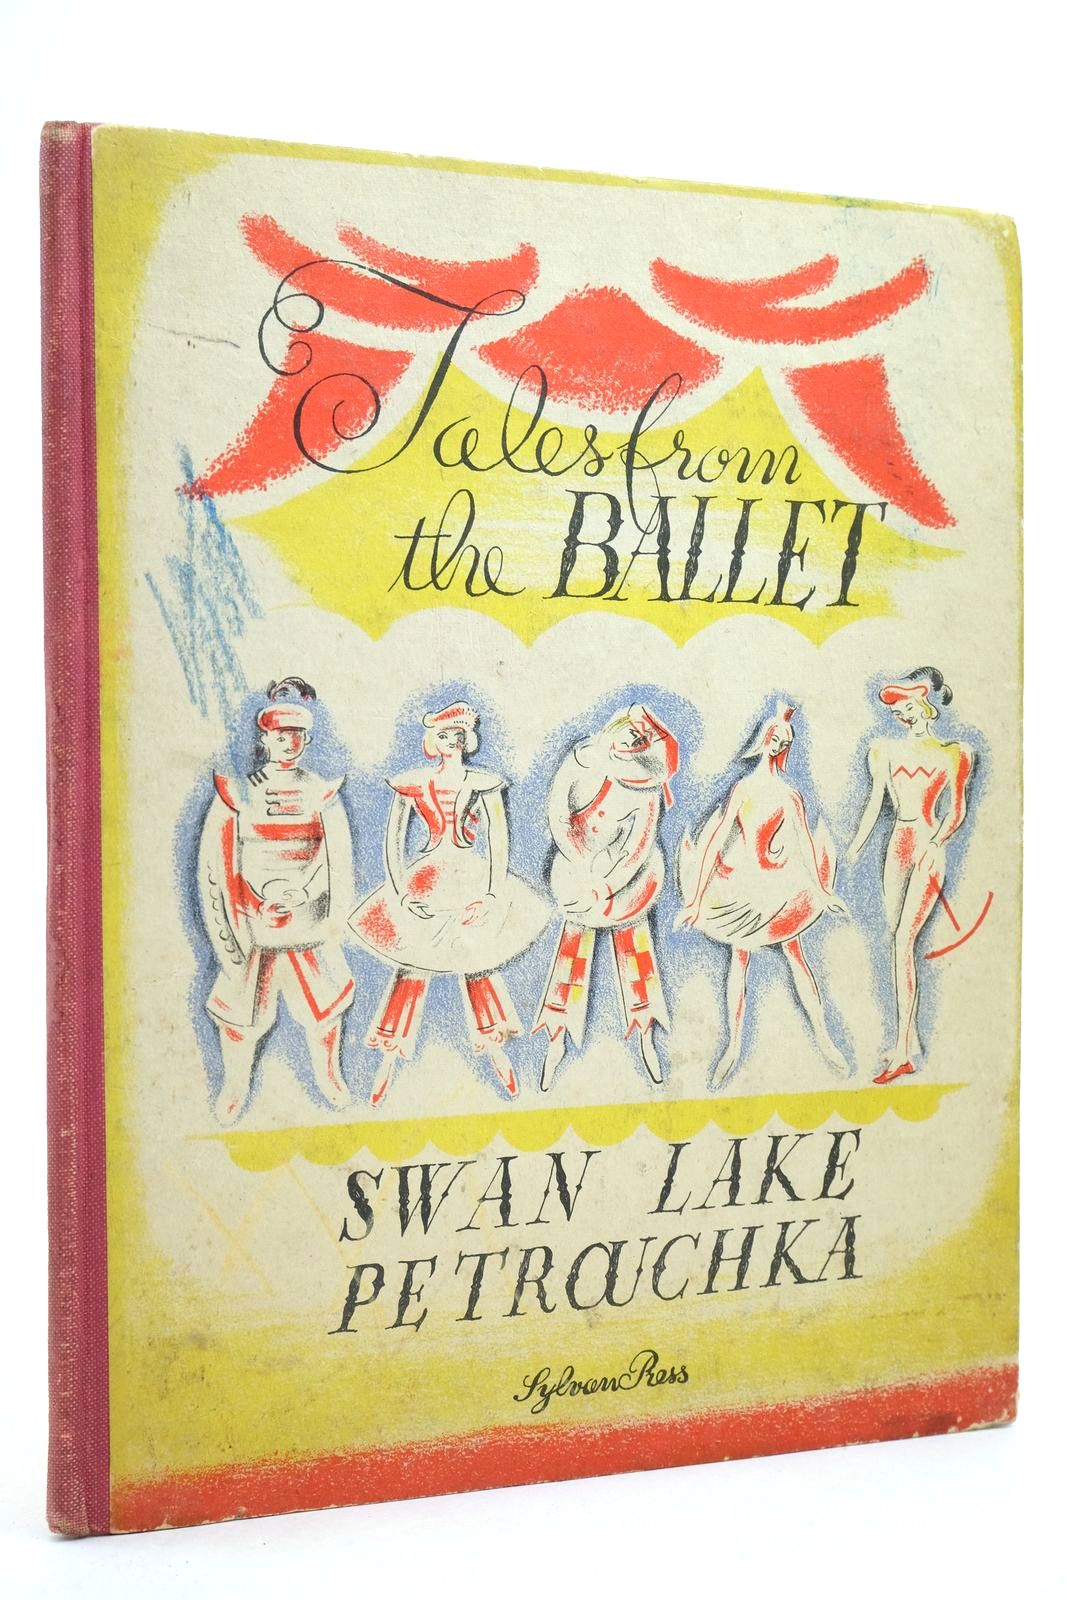 Photo of TALES FROM THE BALLET SWAN LAKE PETROUCHKA- Stock Number: 2139965